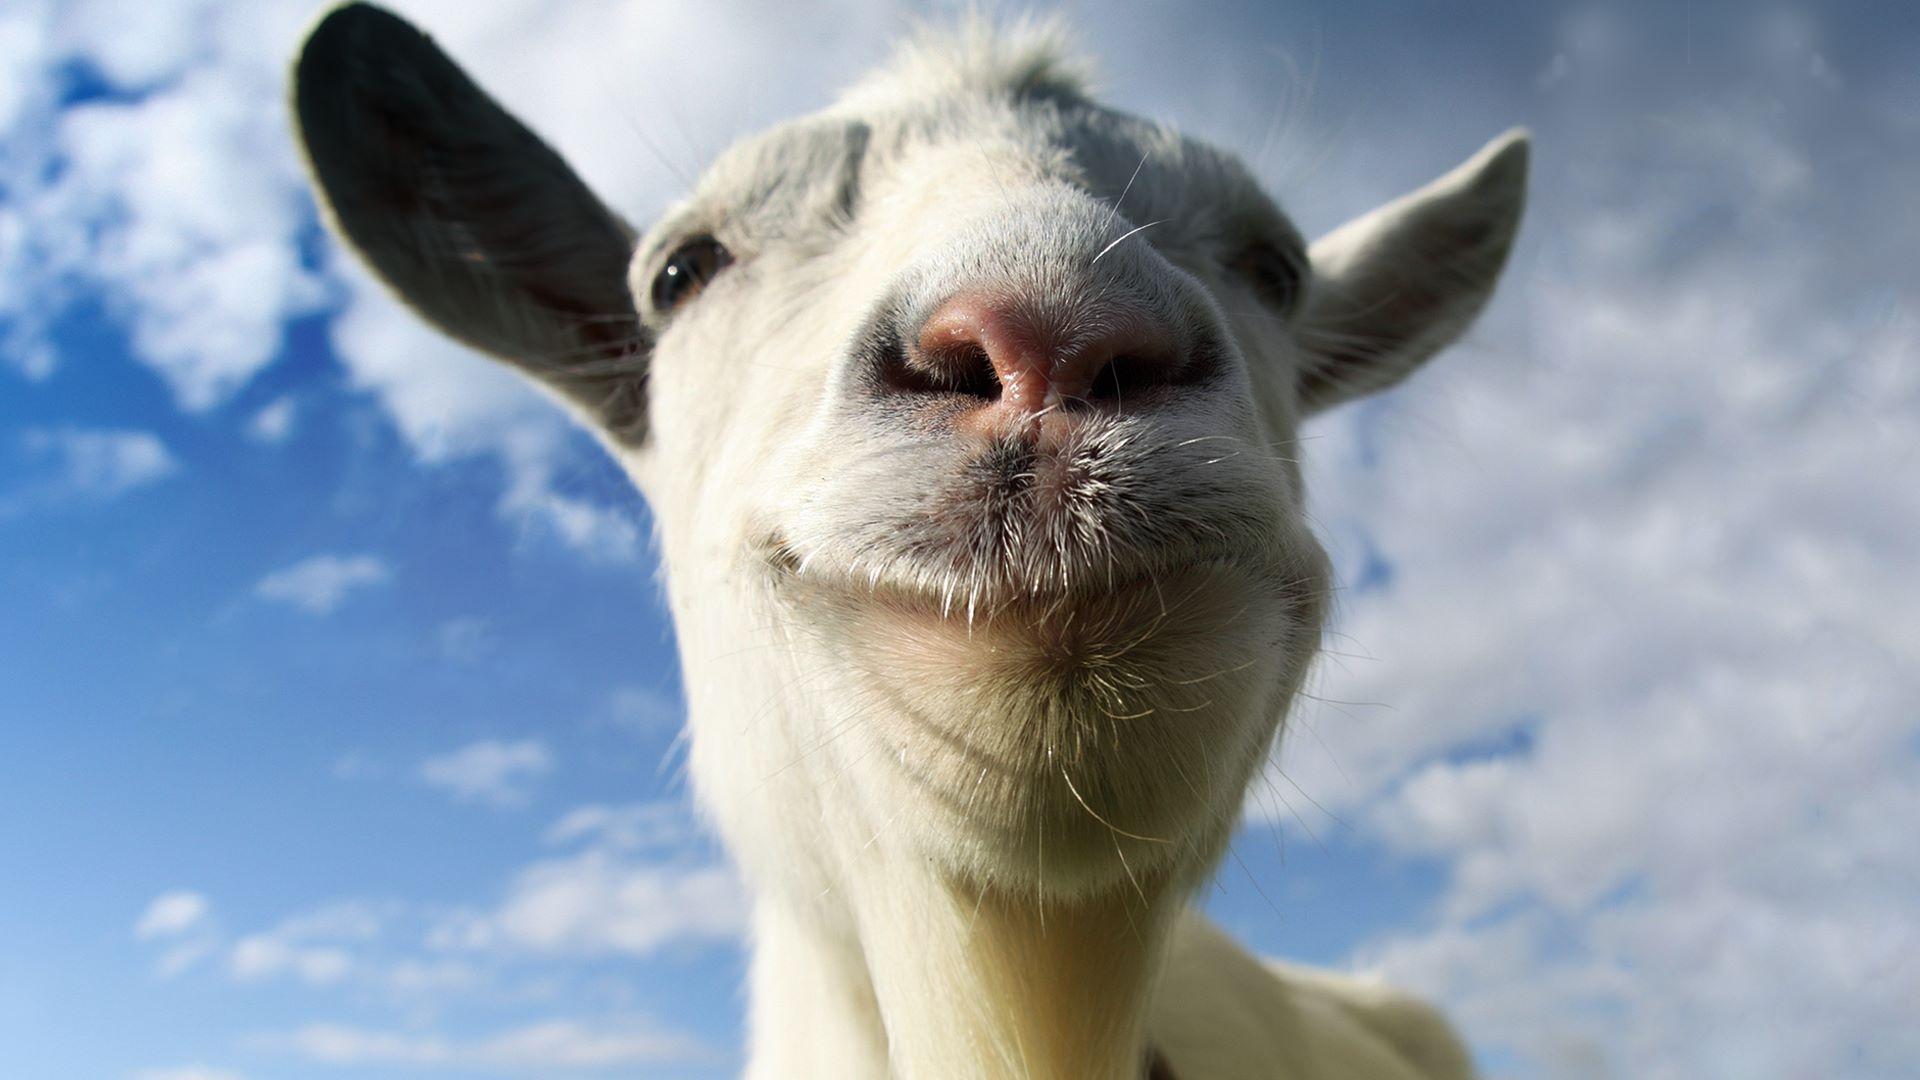 Goat Simulator now available on Microsoft Store for play